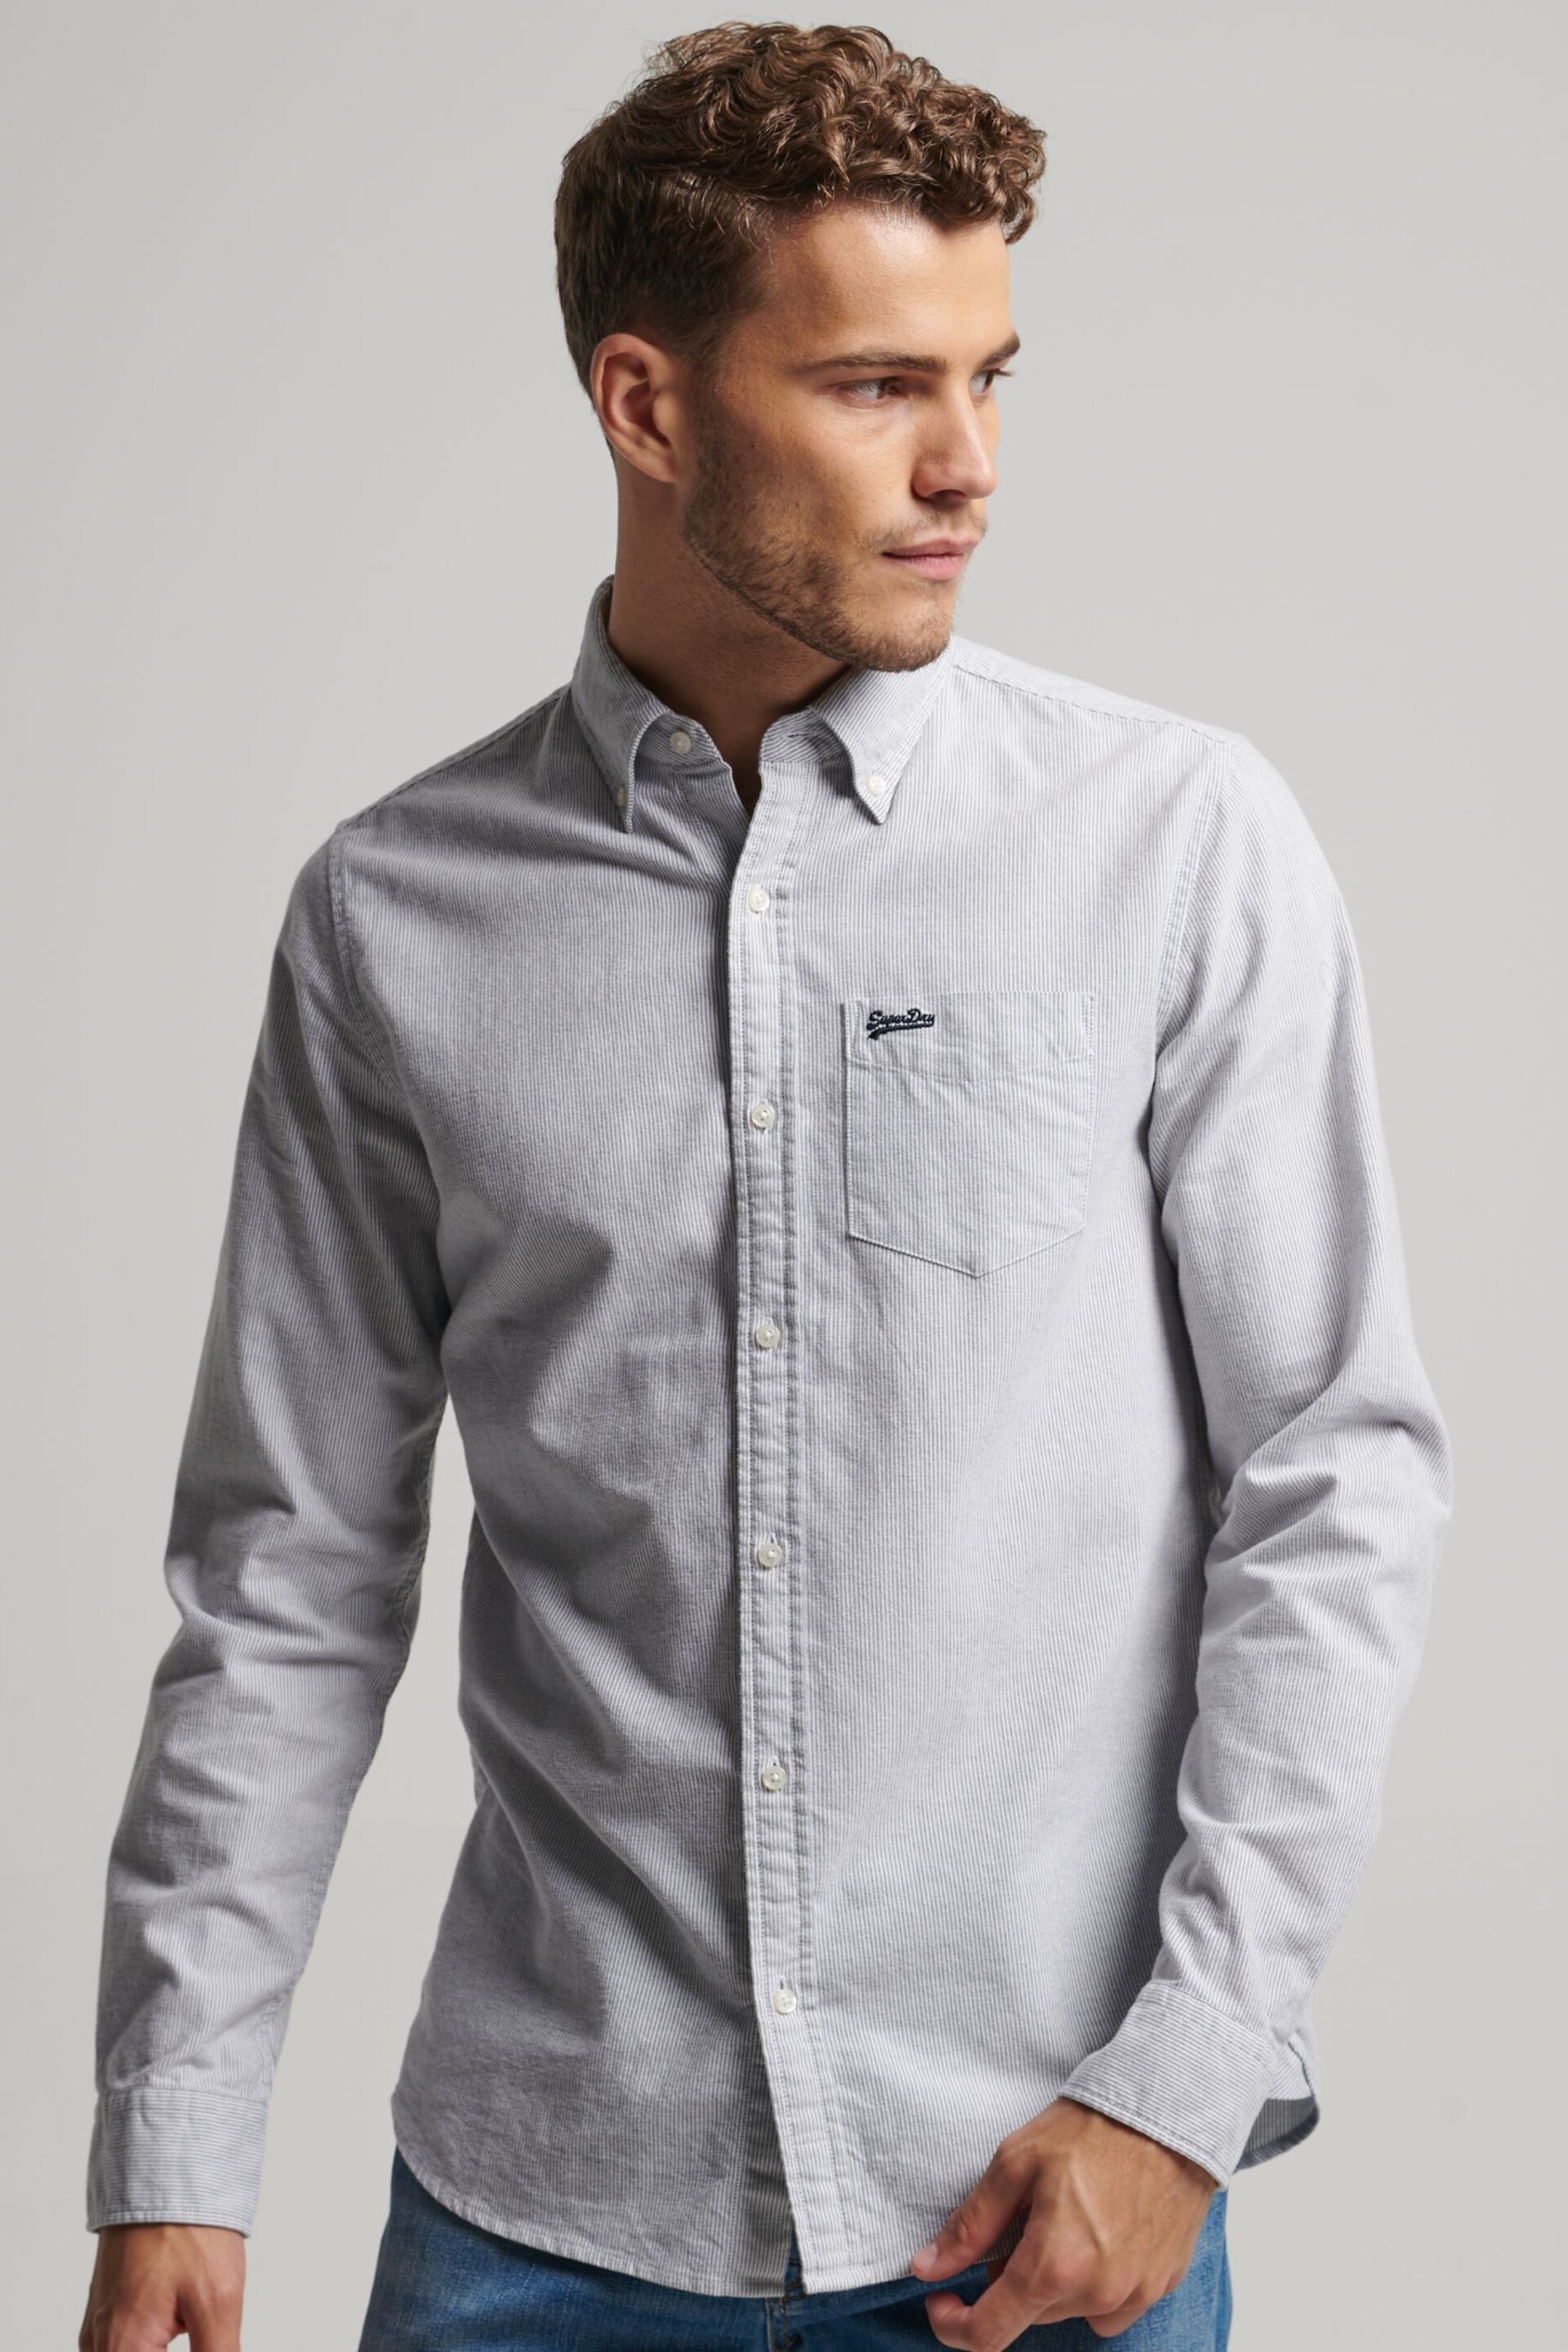 Superdry Blue Cotton Long Sleeved Oxford Shirt - Image 1 of 8